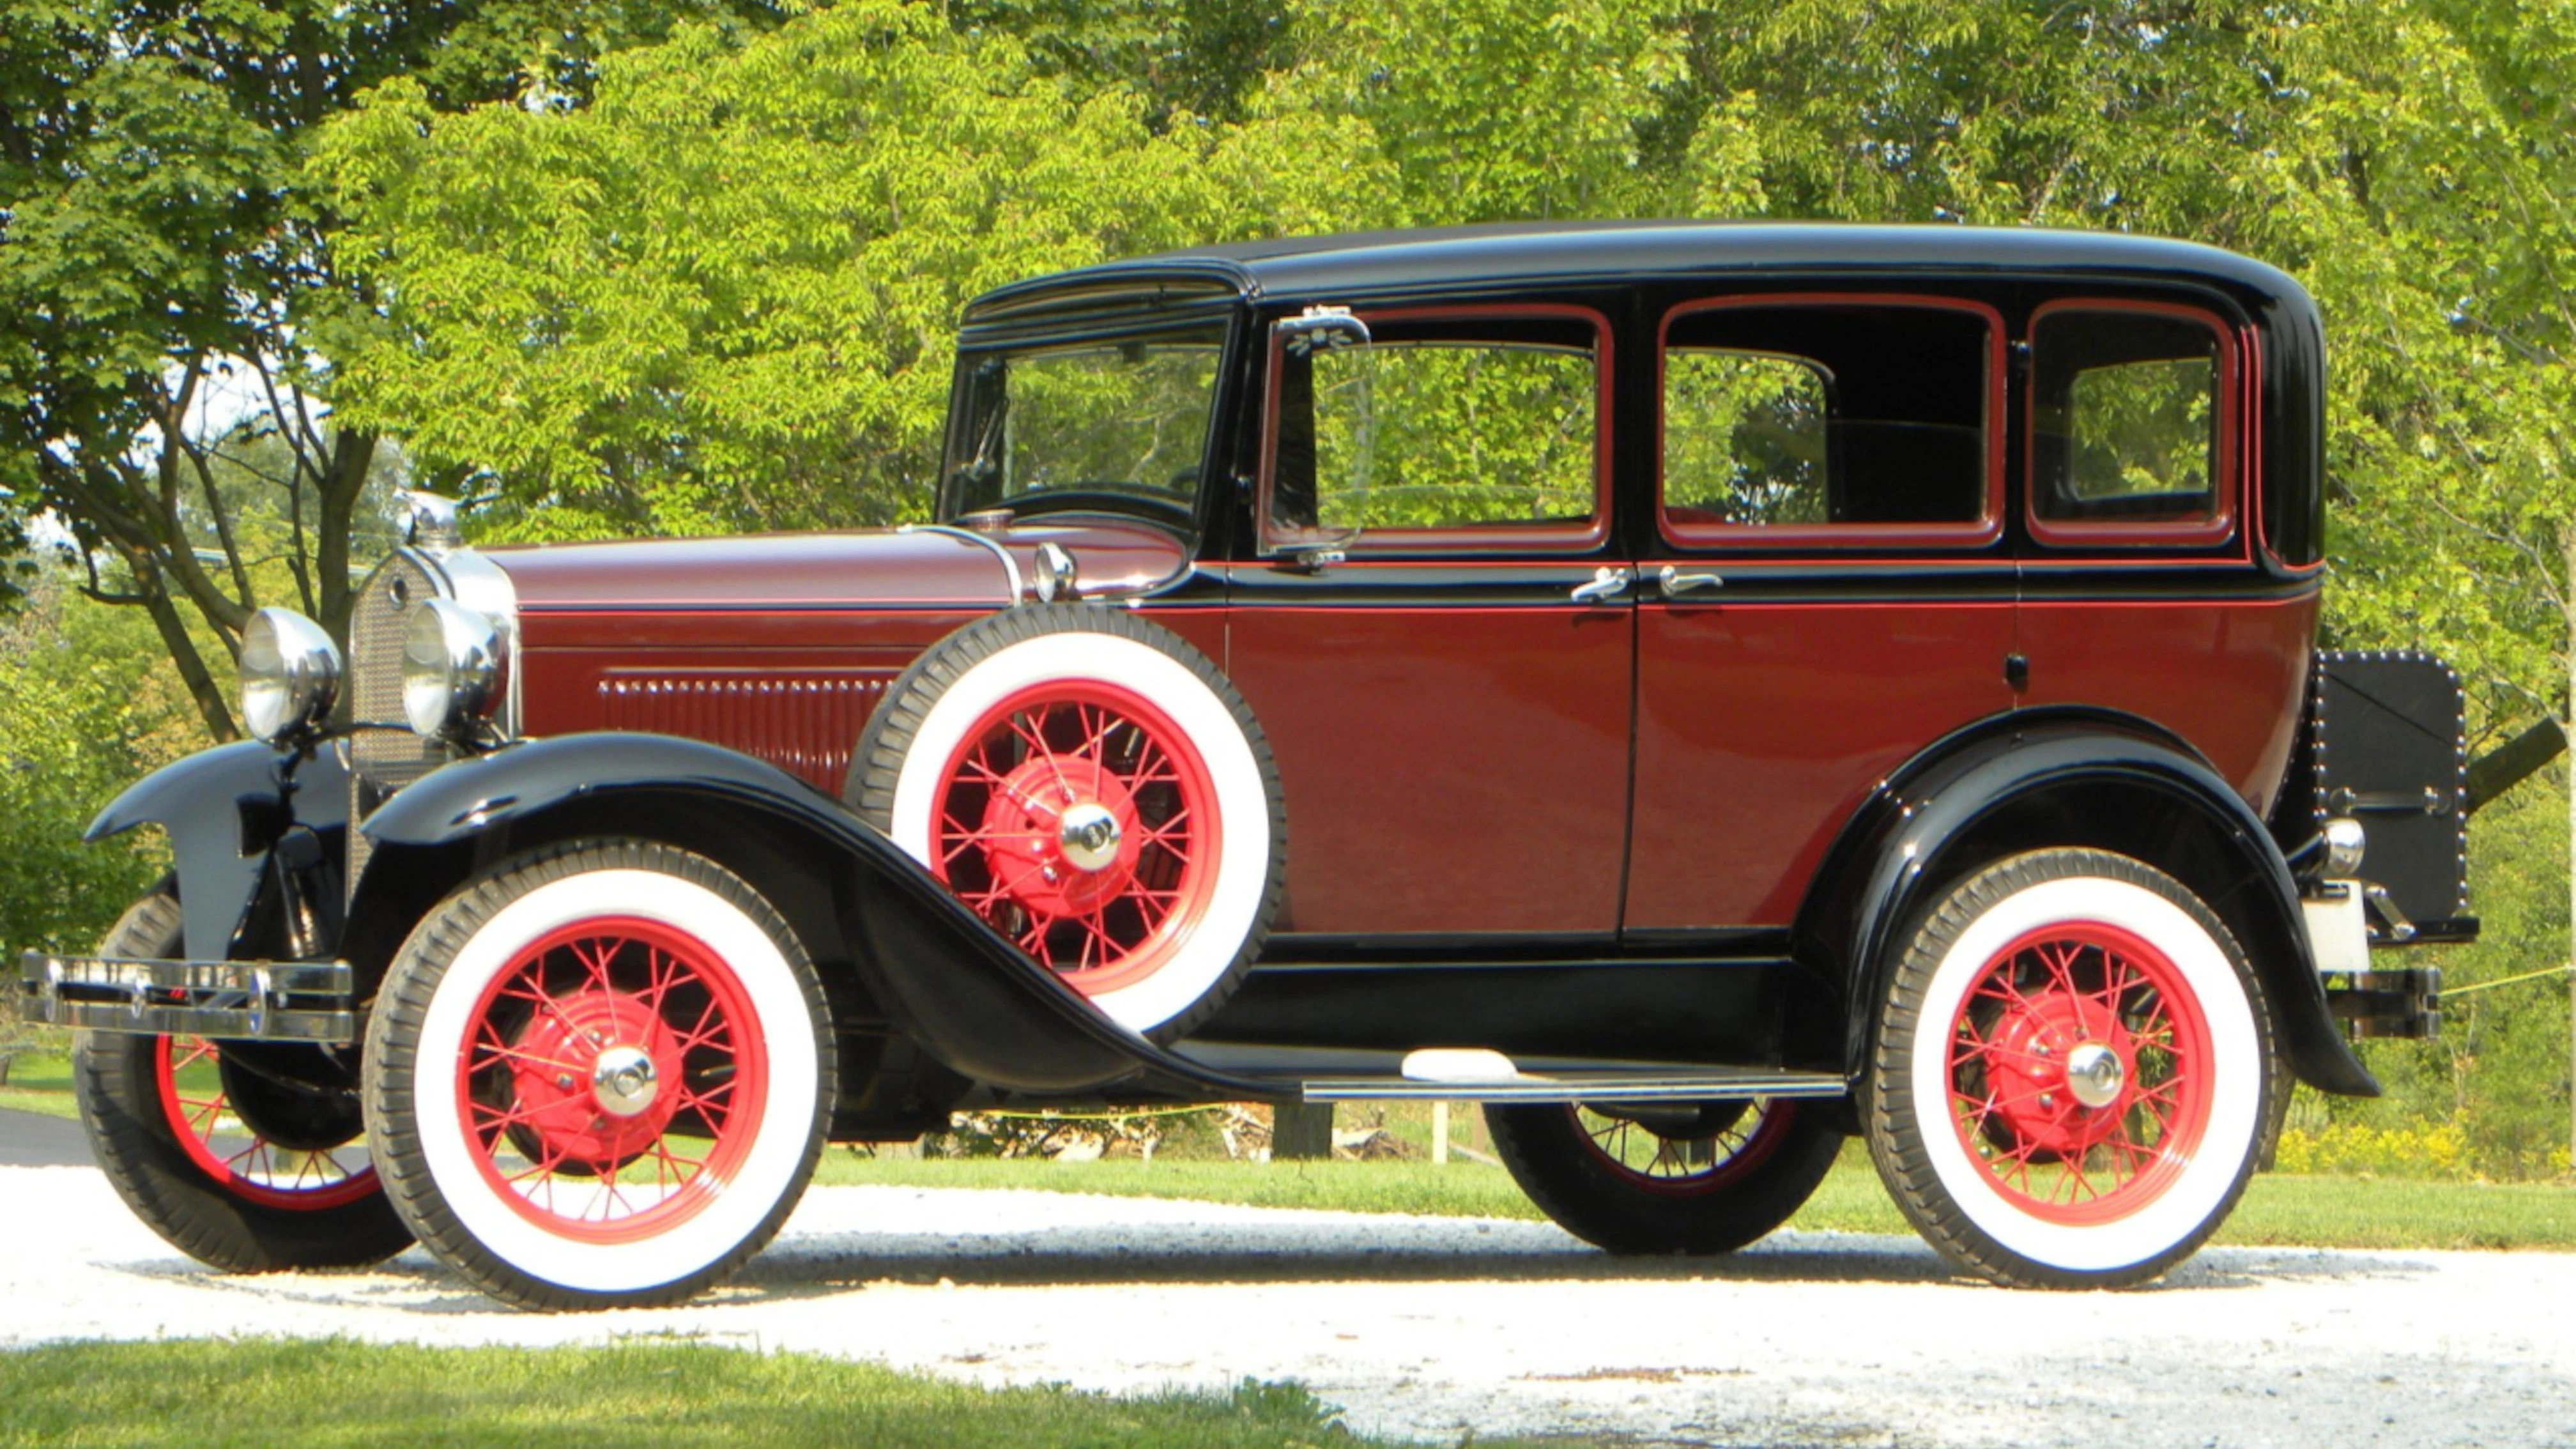 Actual 1928 Ford Model 'A' and plan for my build